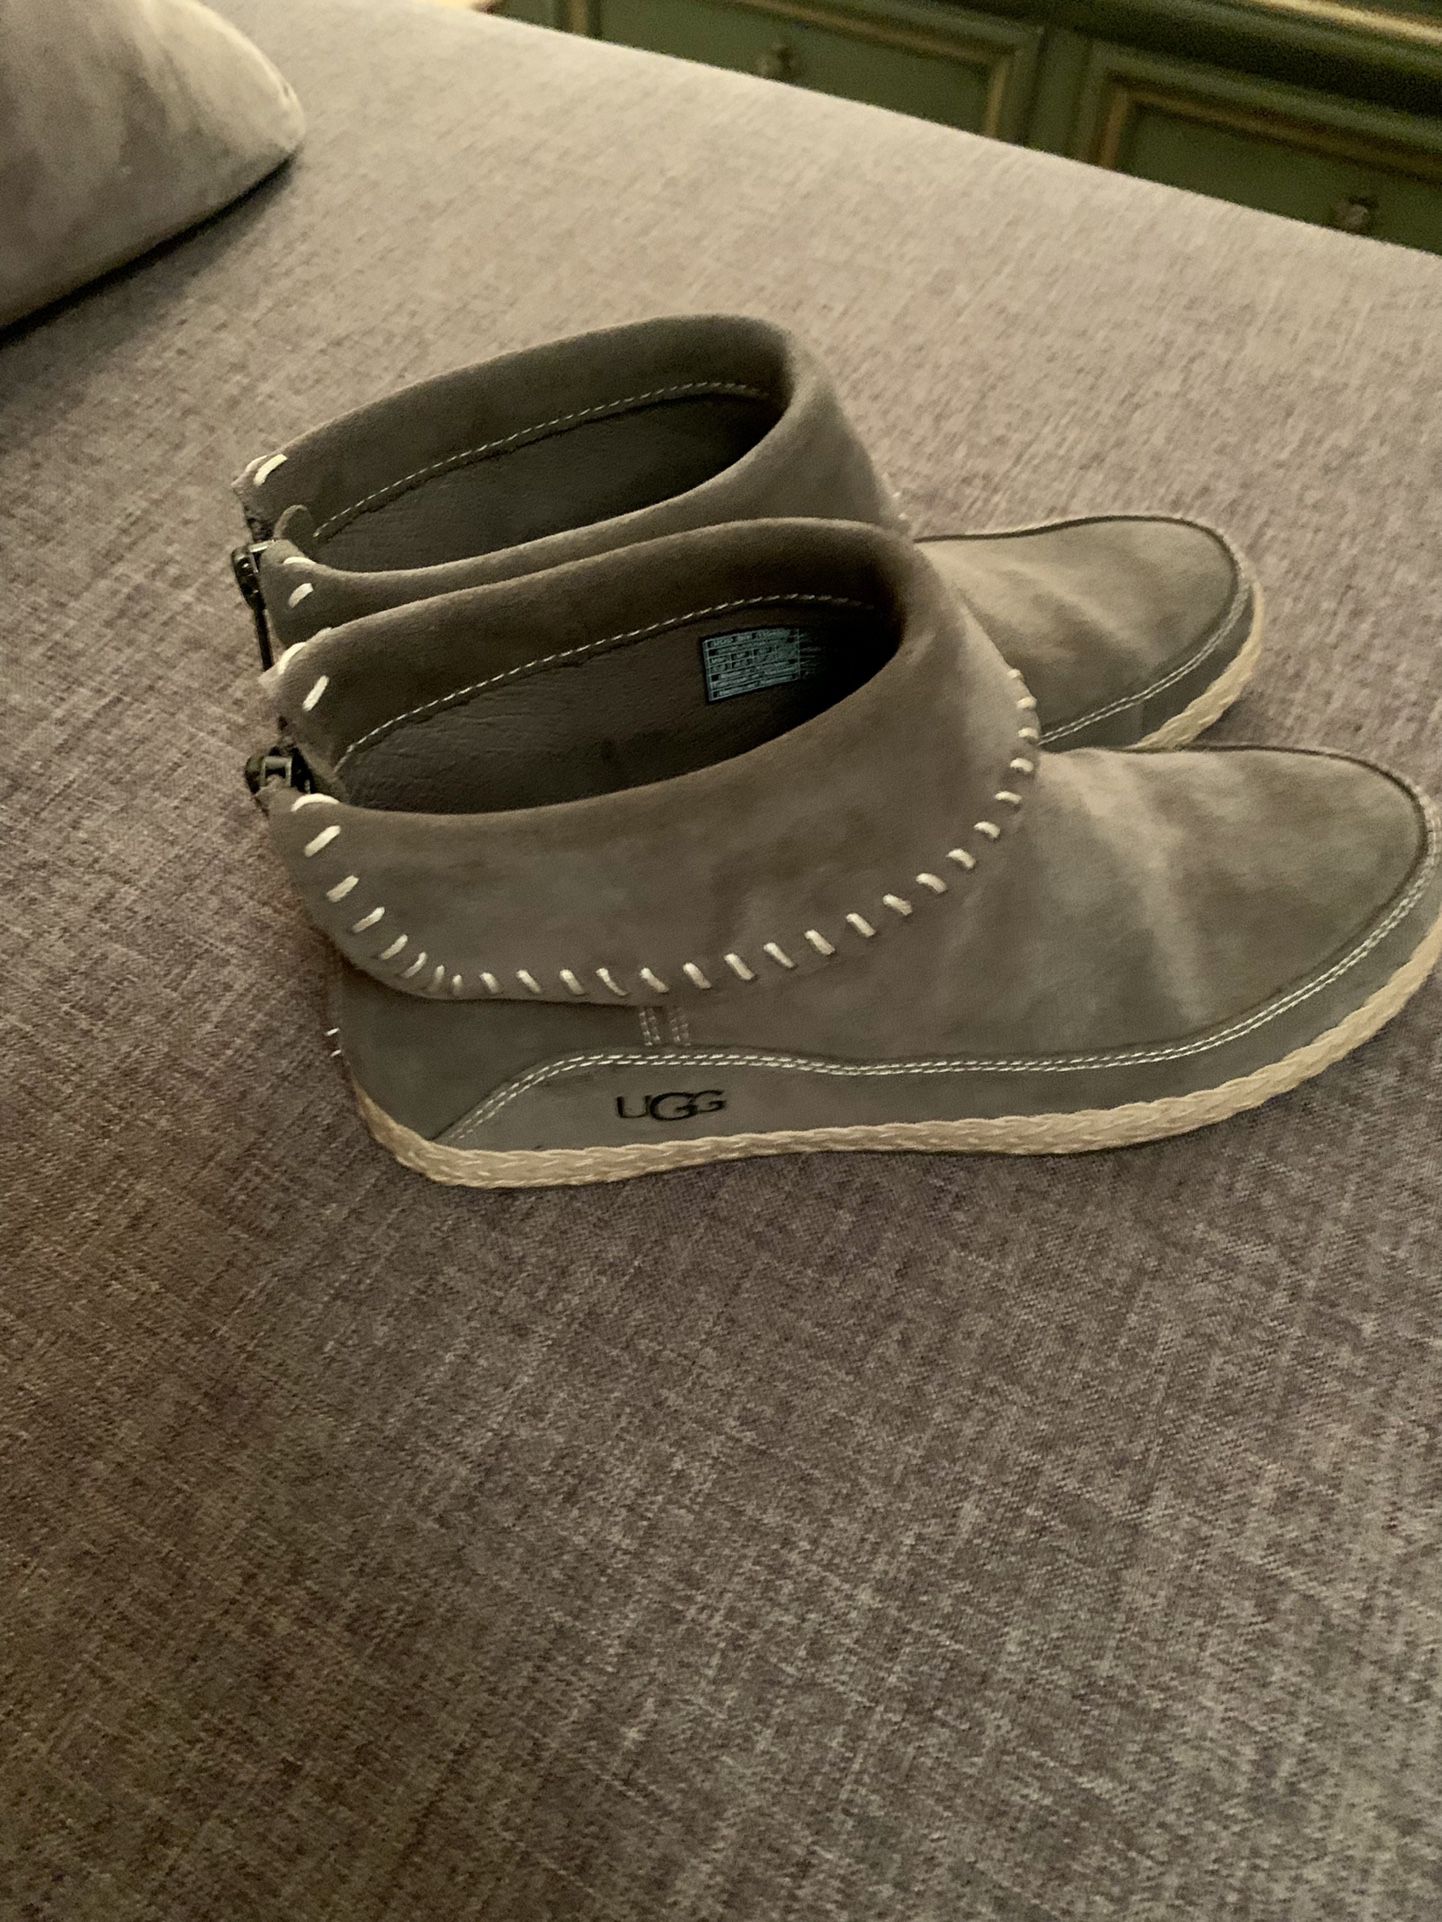 UGG Suede Varney Ankle Boots like new